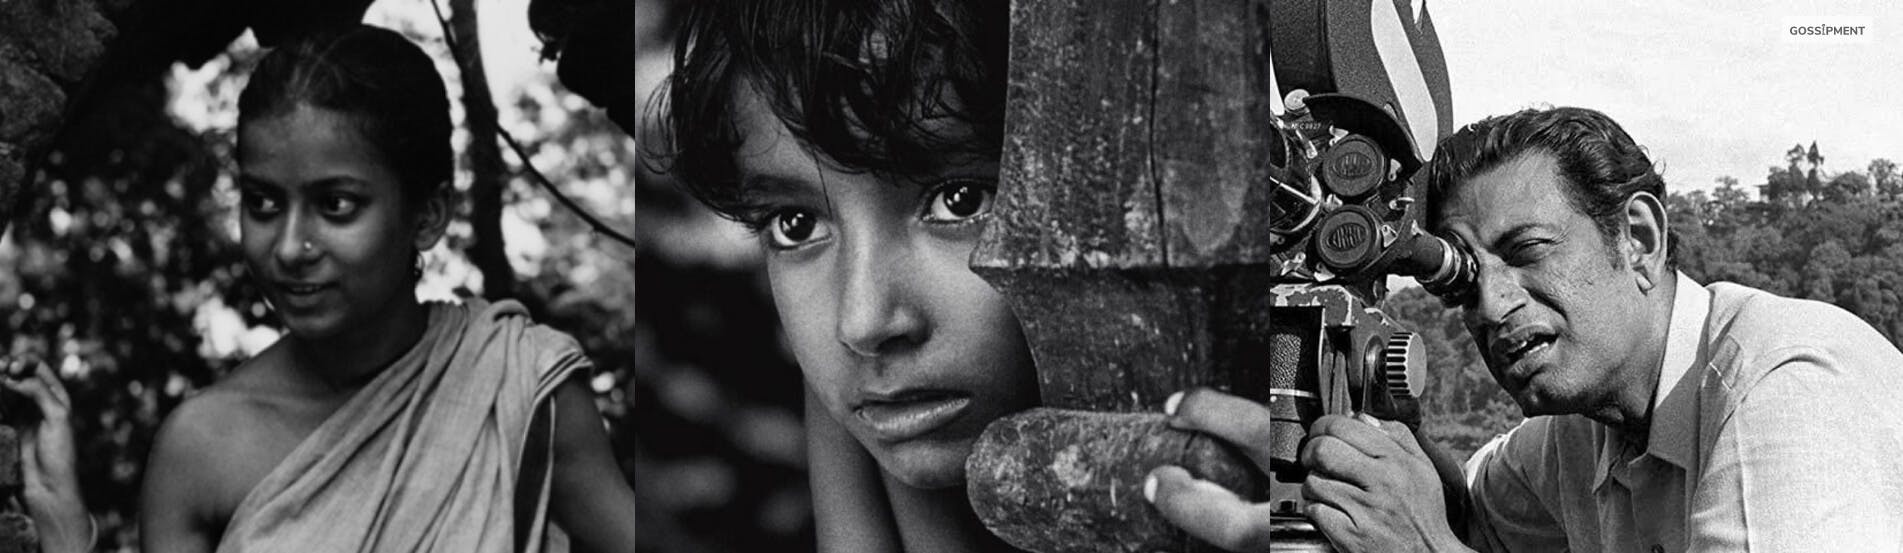 Cover Image for Satyajit Ray’s Iconic Film “Pather Panchali” (1955) Gets The “Best Indian Film Of All Time” By FIPRESCI 